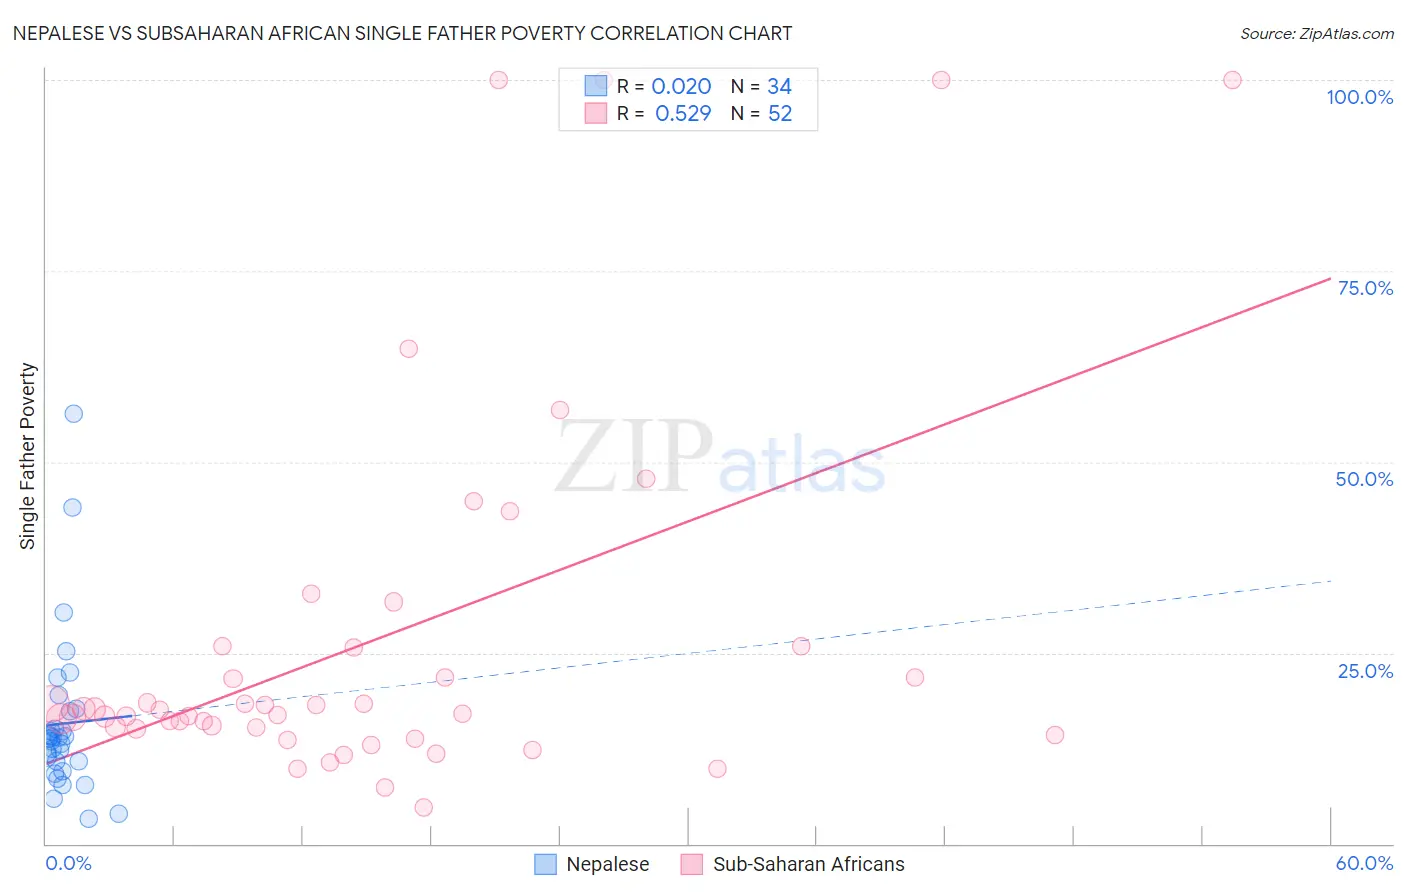 Nepalese vs Subsaharan African Single Father Poverty